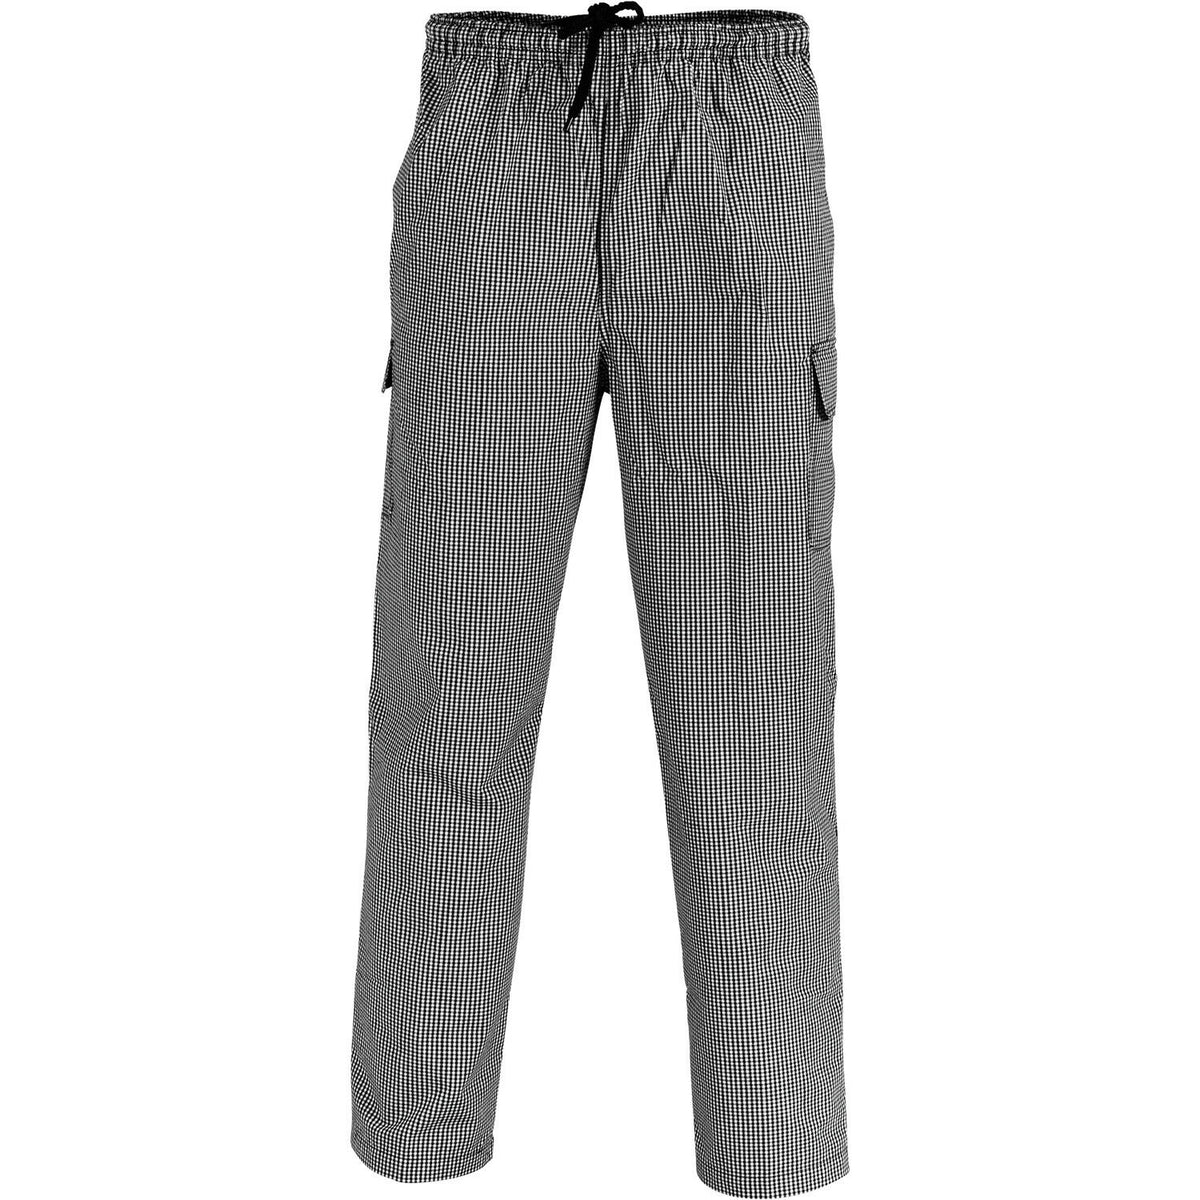 DNC Workwear Mens Drawstring Poly Cotton Cargo Pants Work Tough Casual 1506-Collins Clothing Co